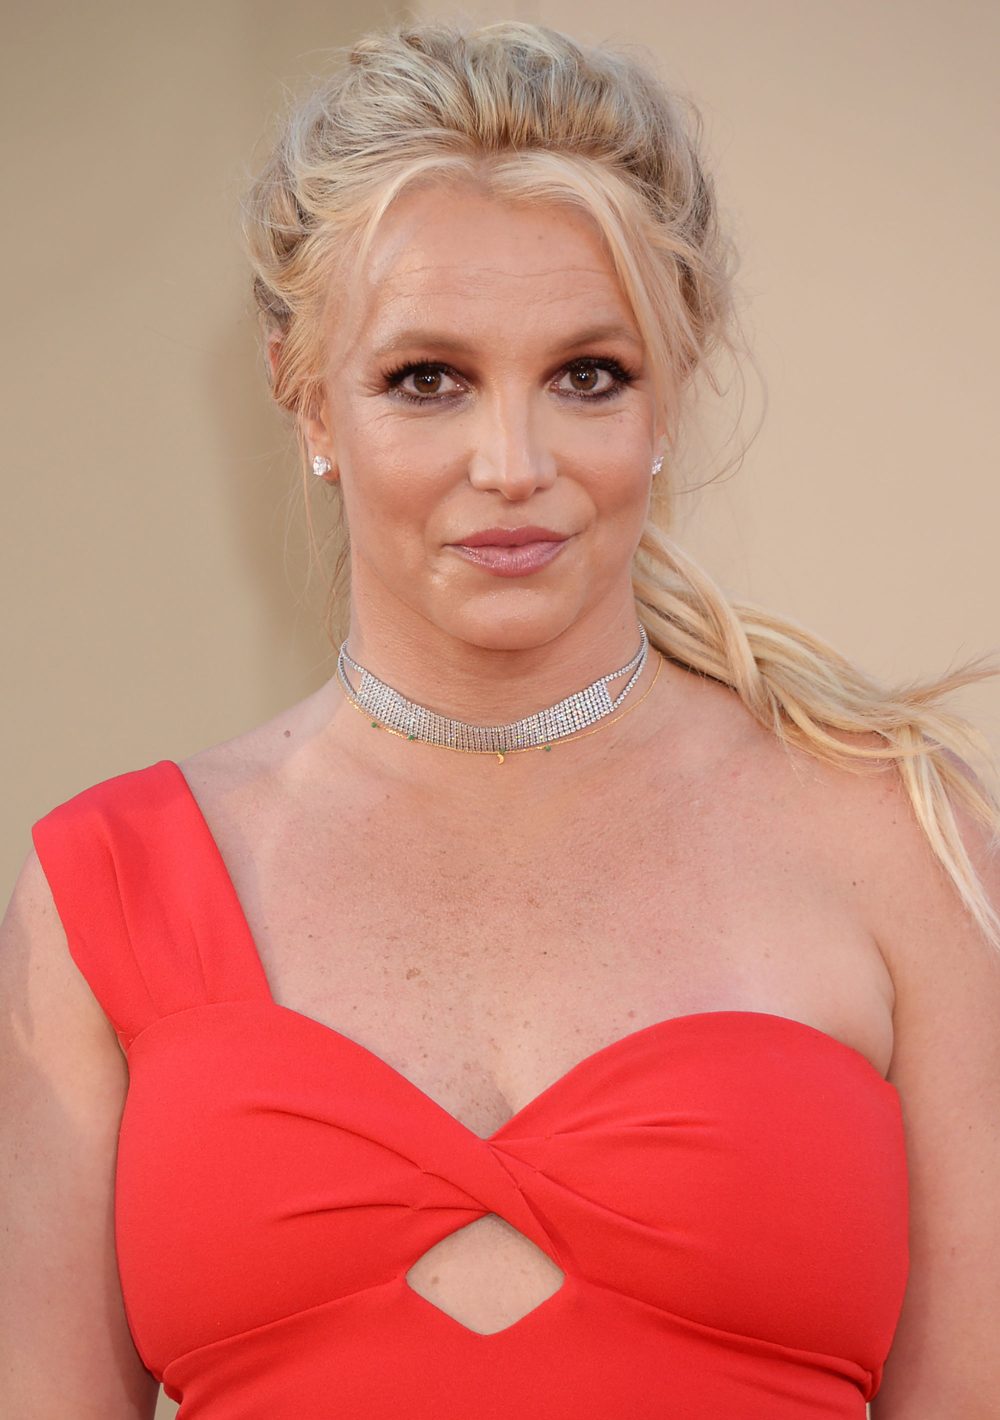 Britney Spears Hits Back at Trolls for ‘Criticizing’ Her Posts: ‘Be Nice’